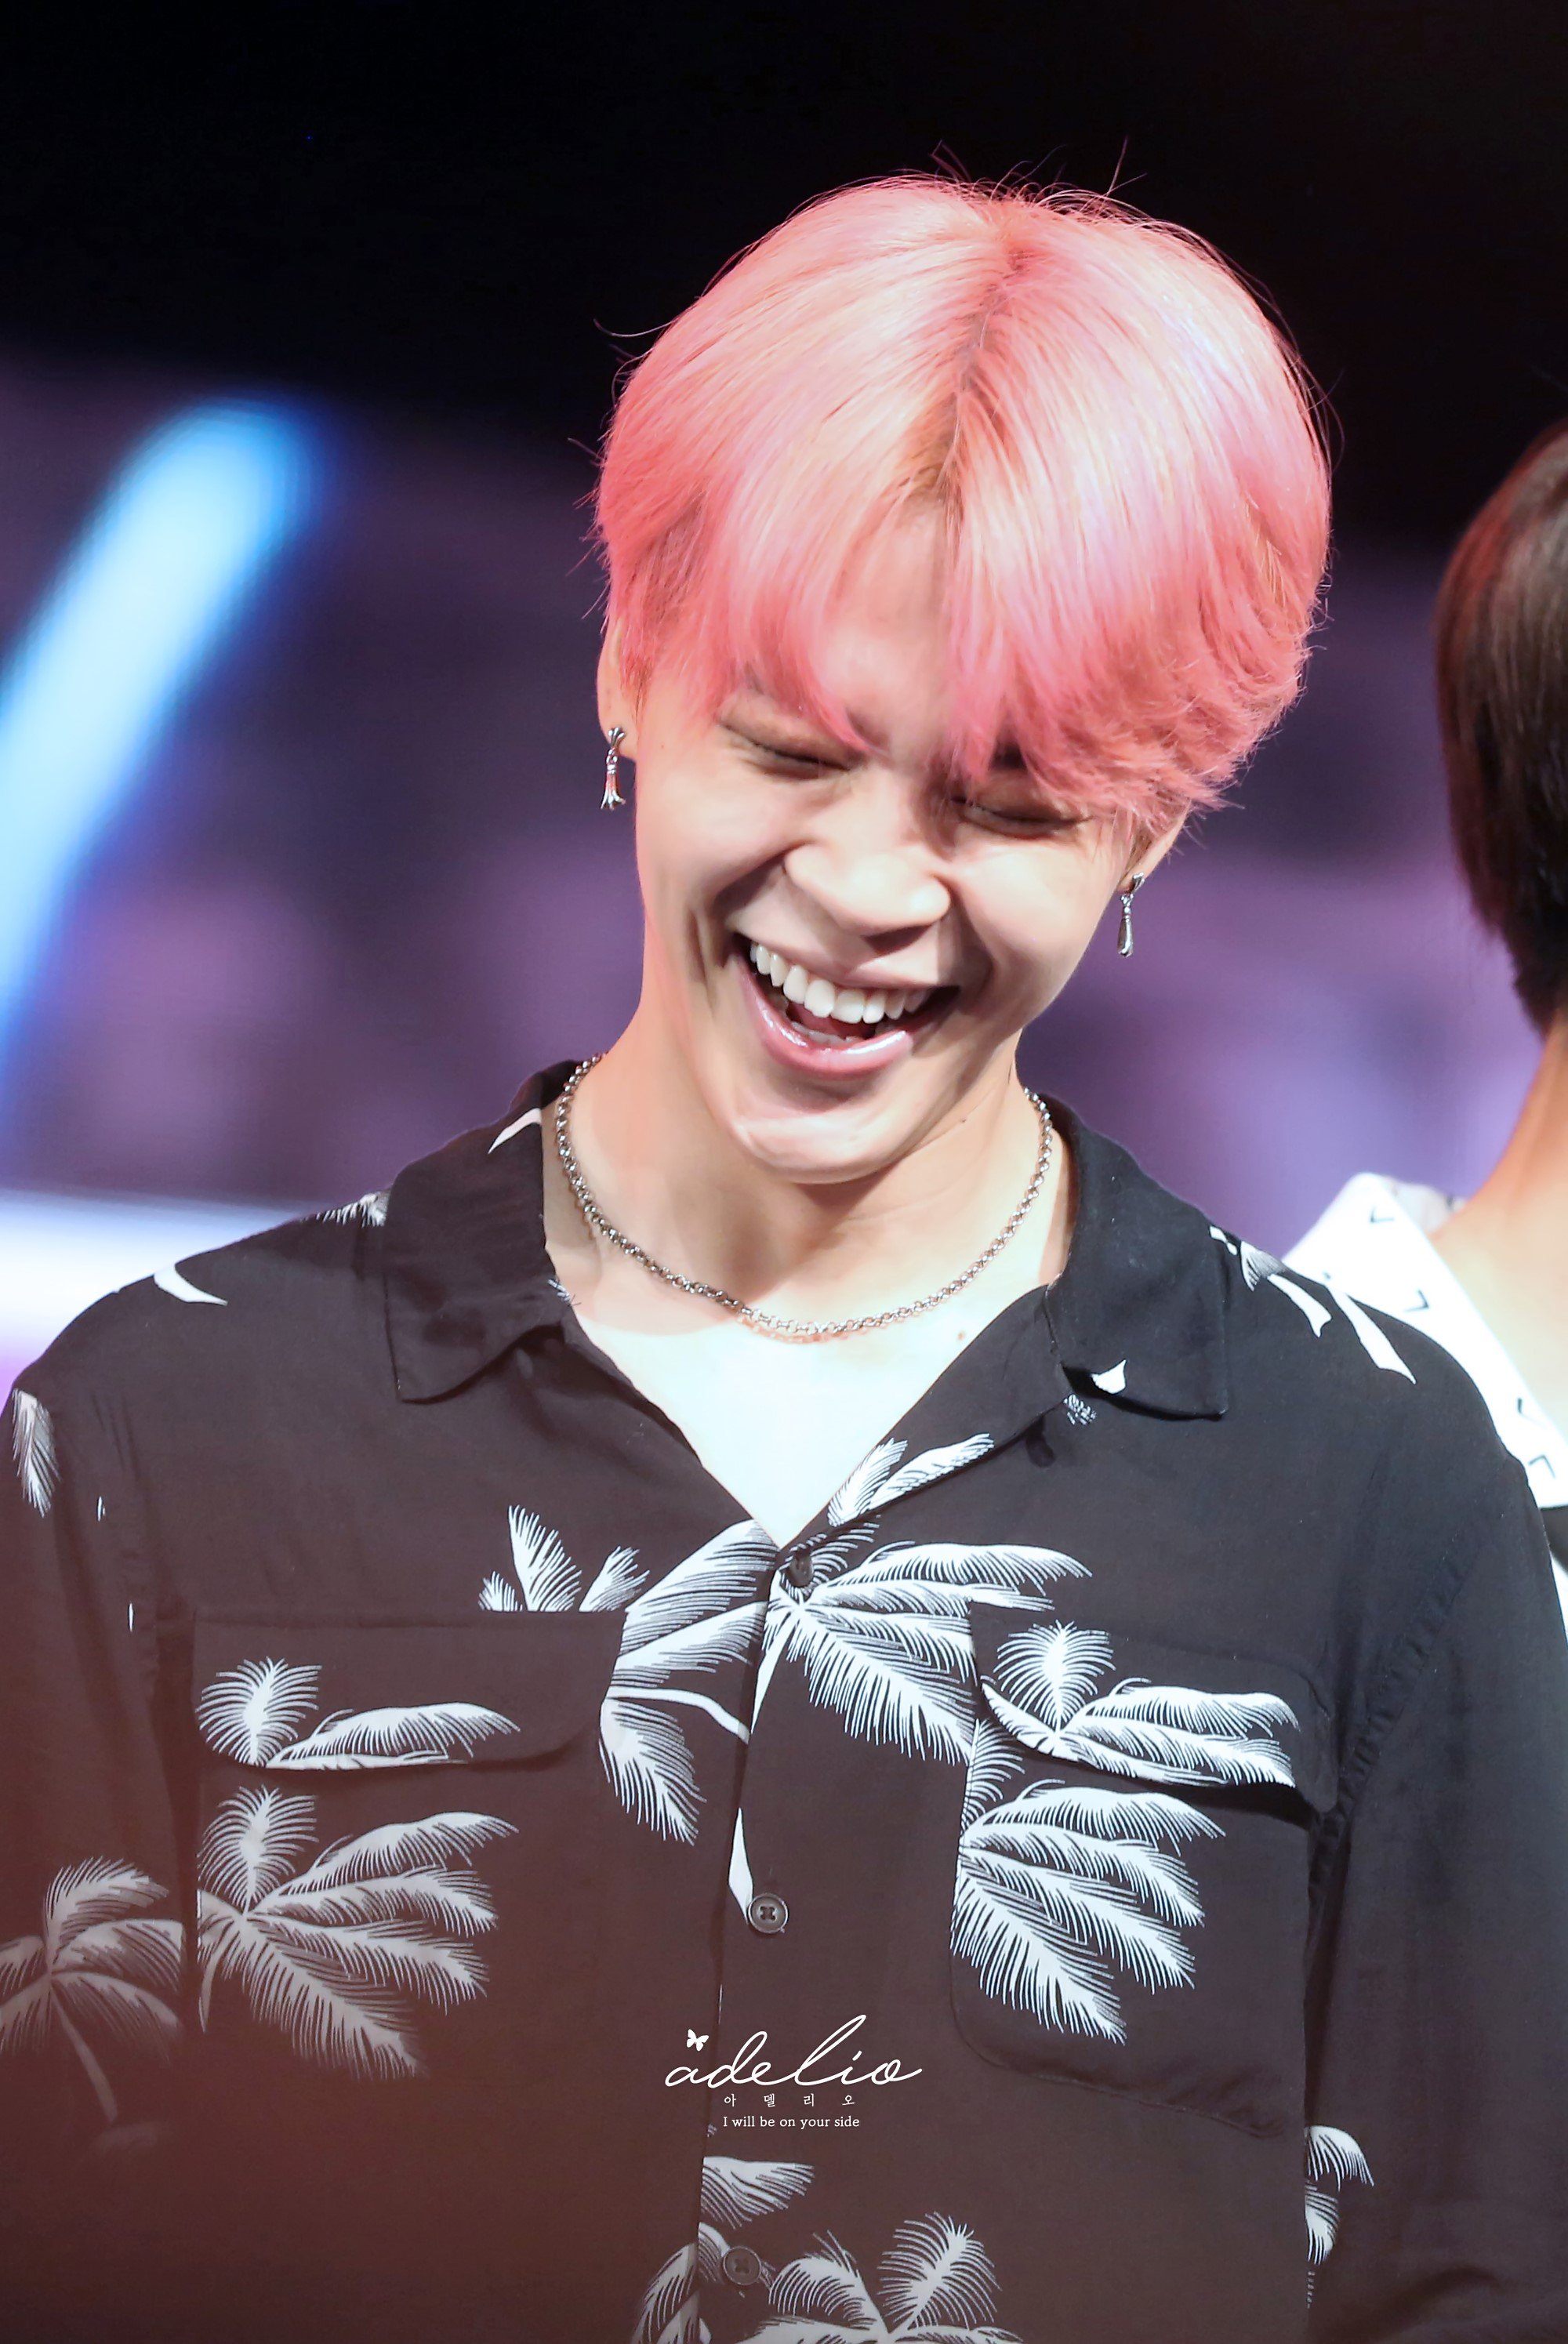 Hd Photos Of Bts Jimin That Look Like They Belong In A Museum Koreaboo